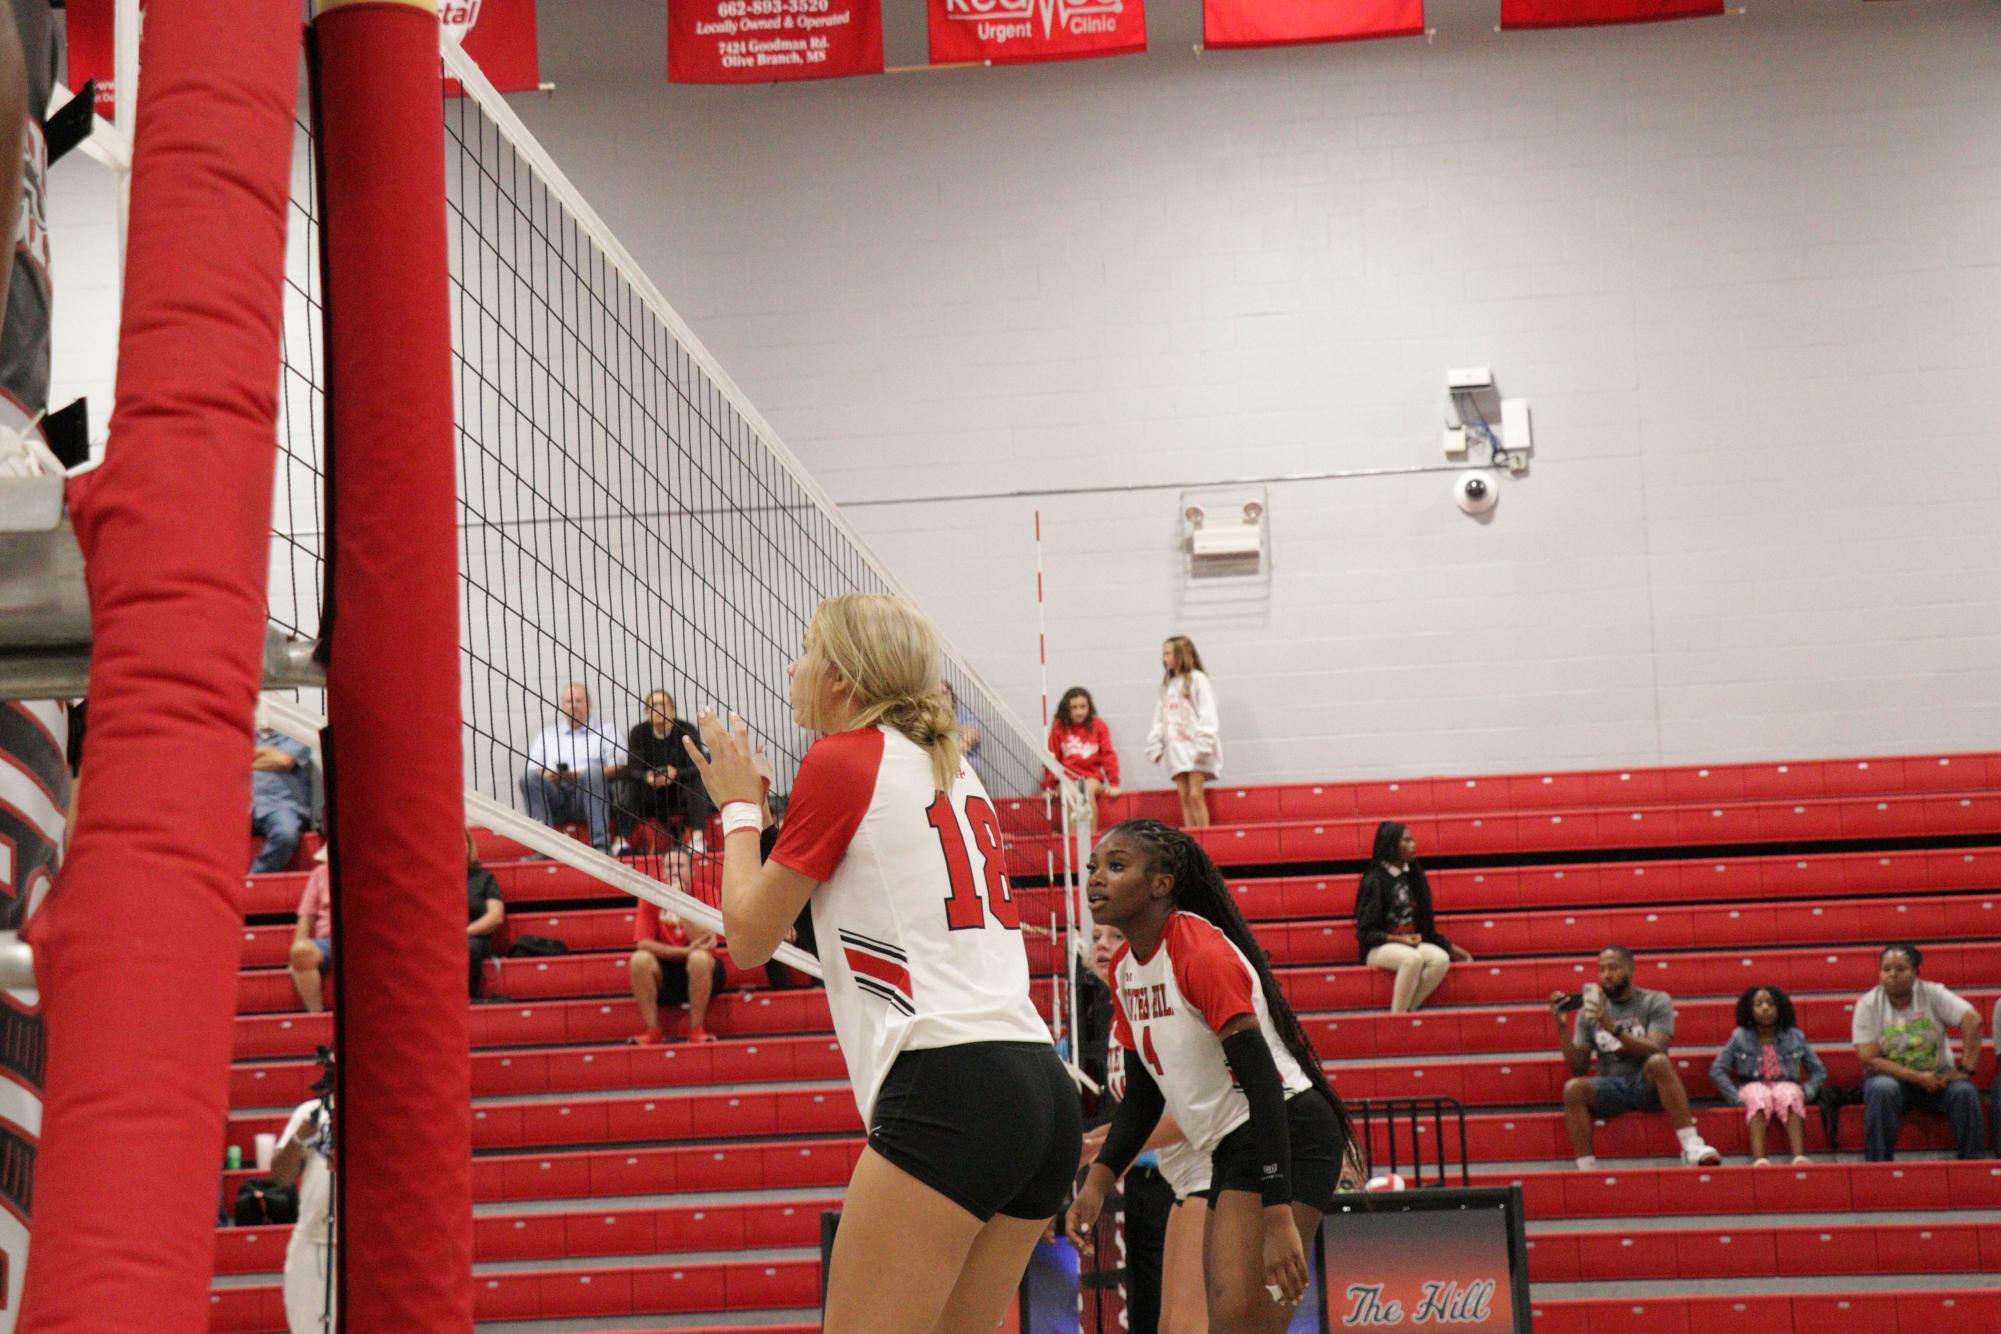 The+CHHS+Volleyball+team+had+their+second+loss+of+the+23-24+season+last+Thursday%2C+August+10th%2C+when+they+competed+against+Lafayette+High+School.